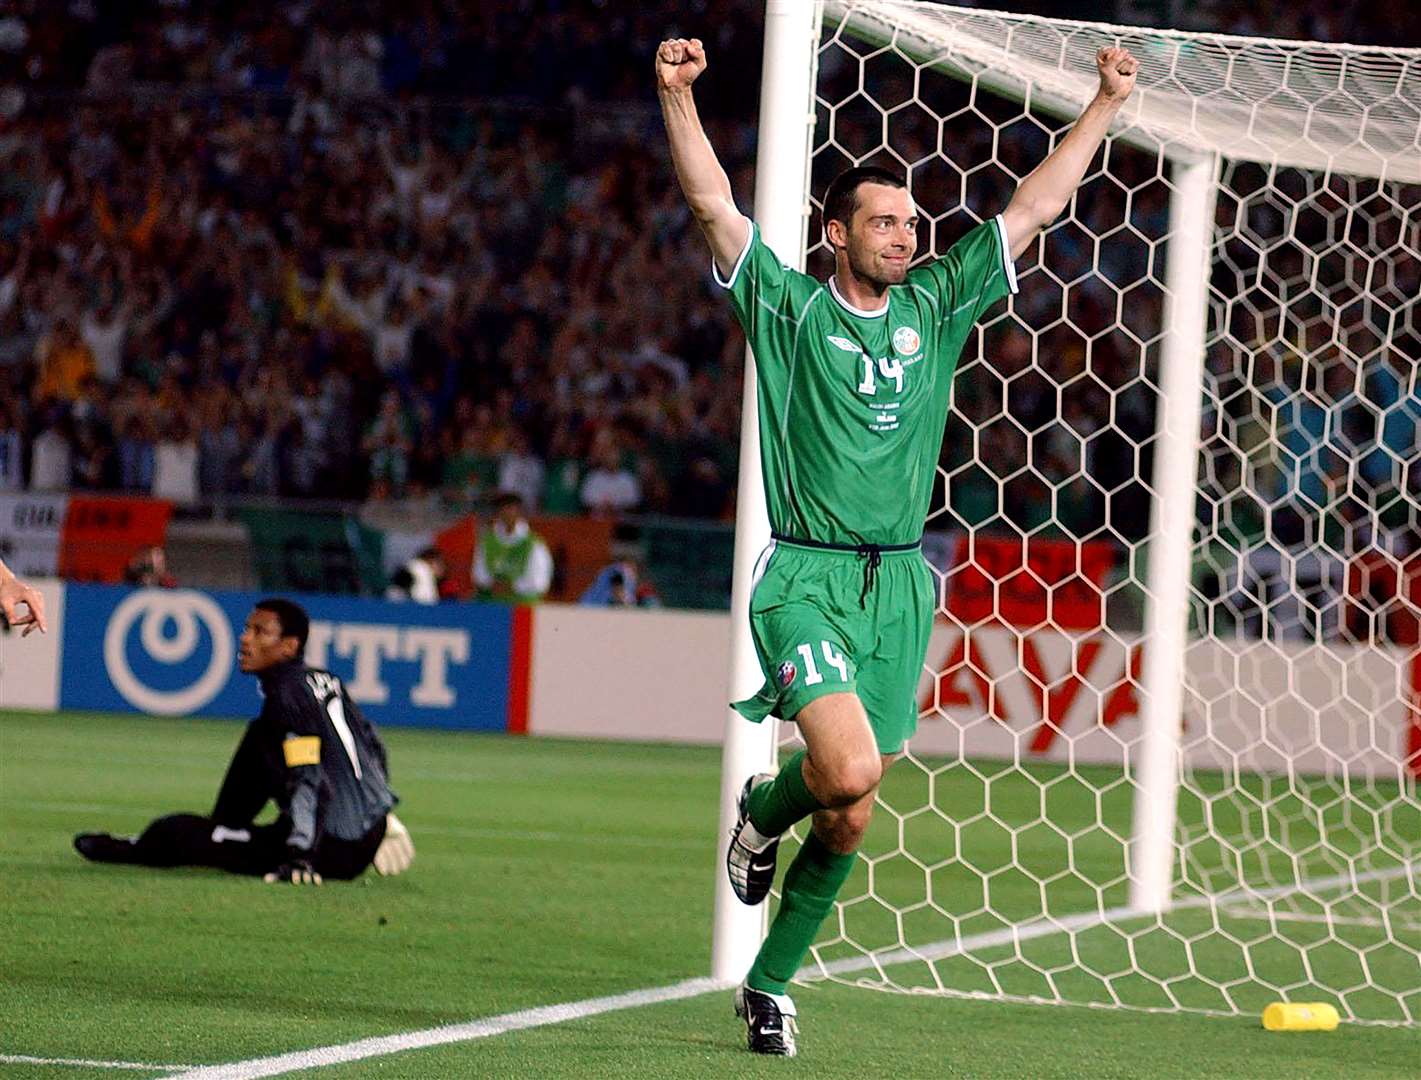 Former Maidstone defender Gary Breen celebrates after scoring for Ireland against Saudi Arabia in the 2002 World Cup Picture: PA Images